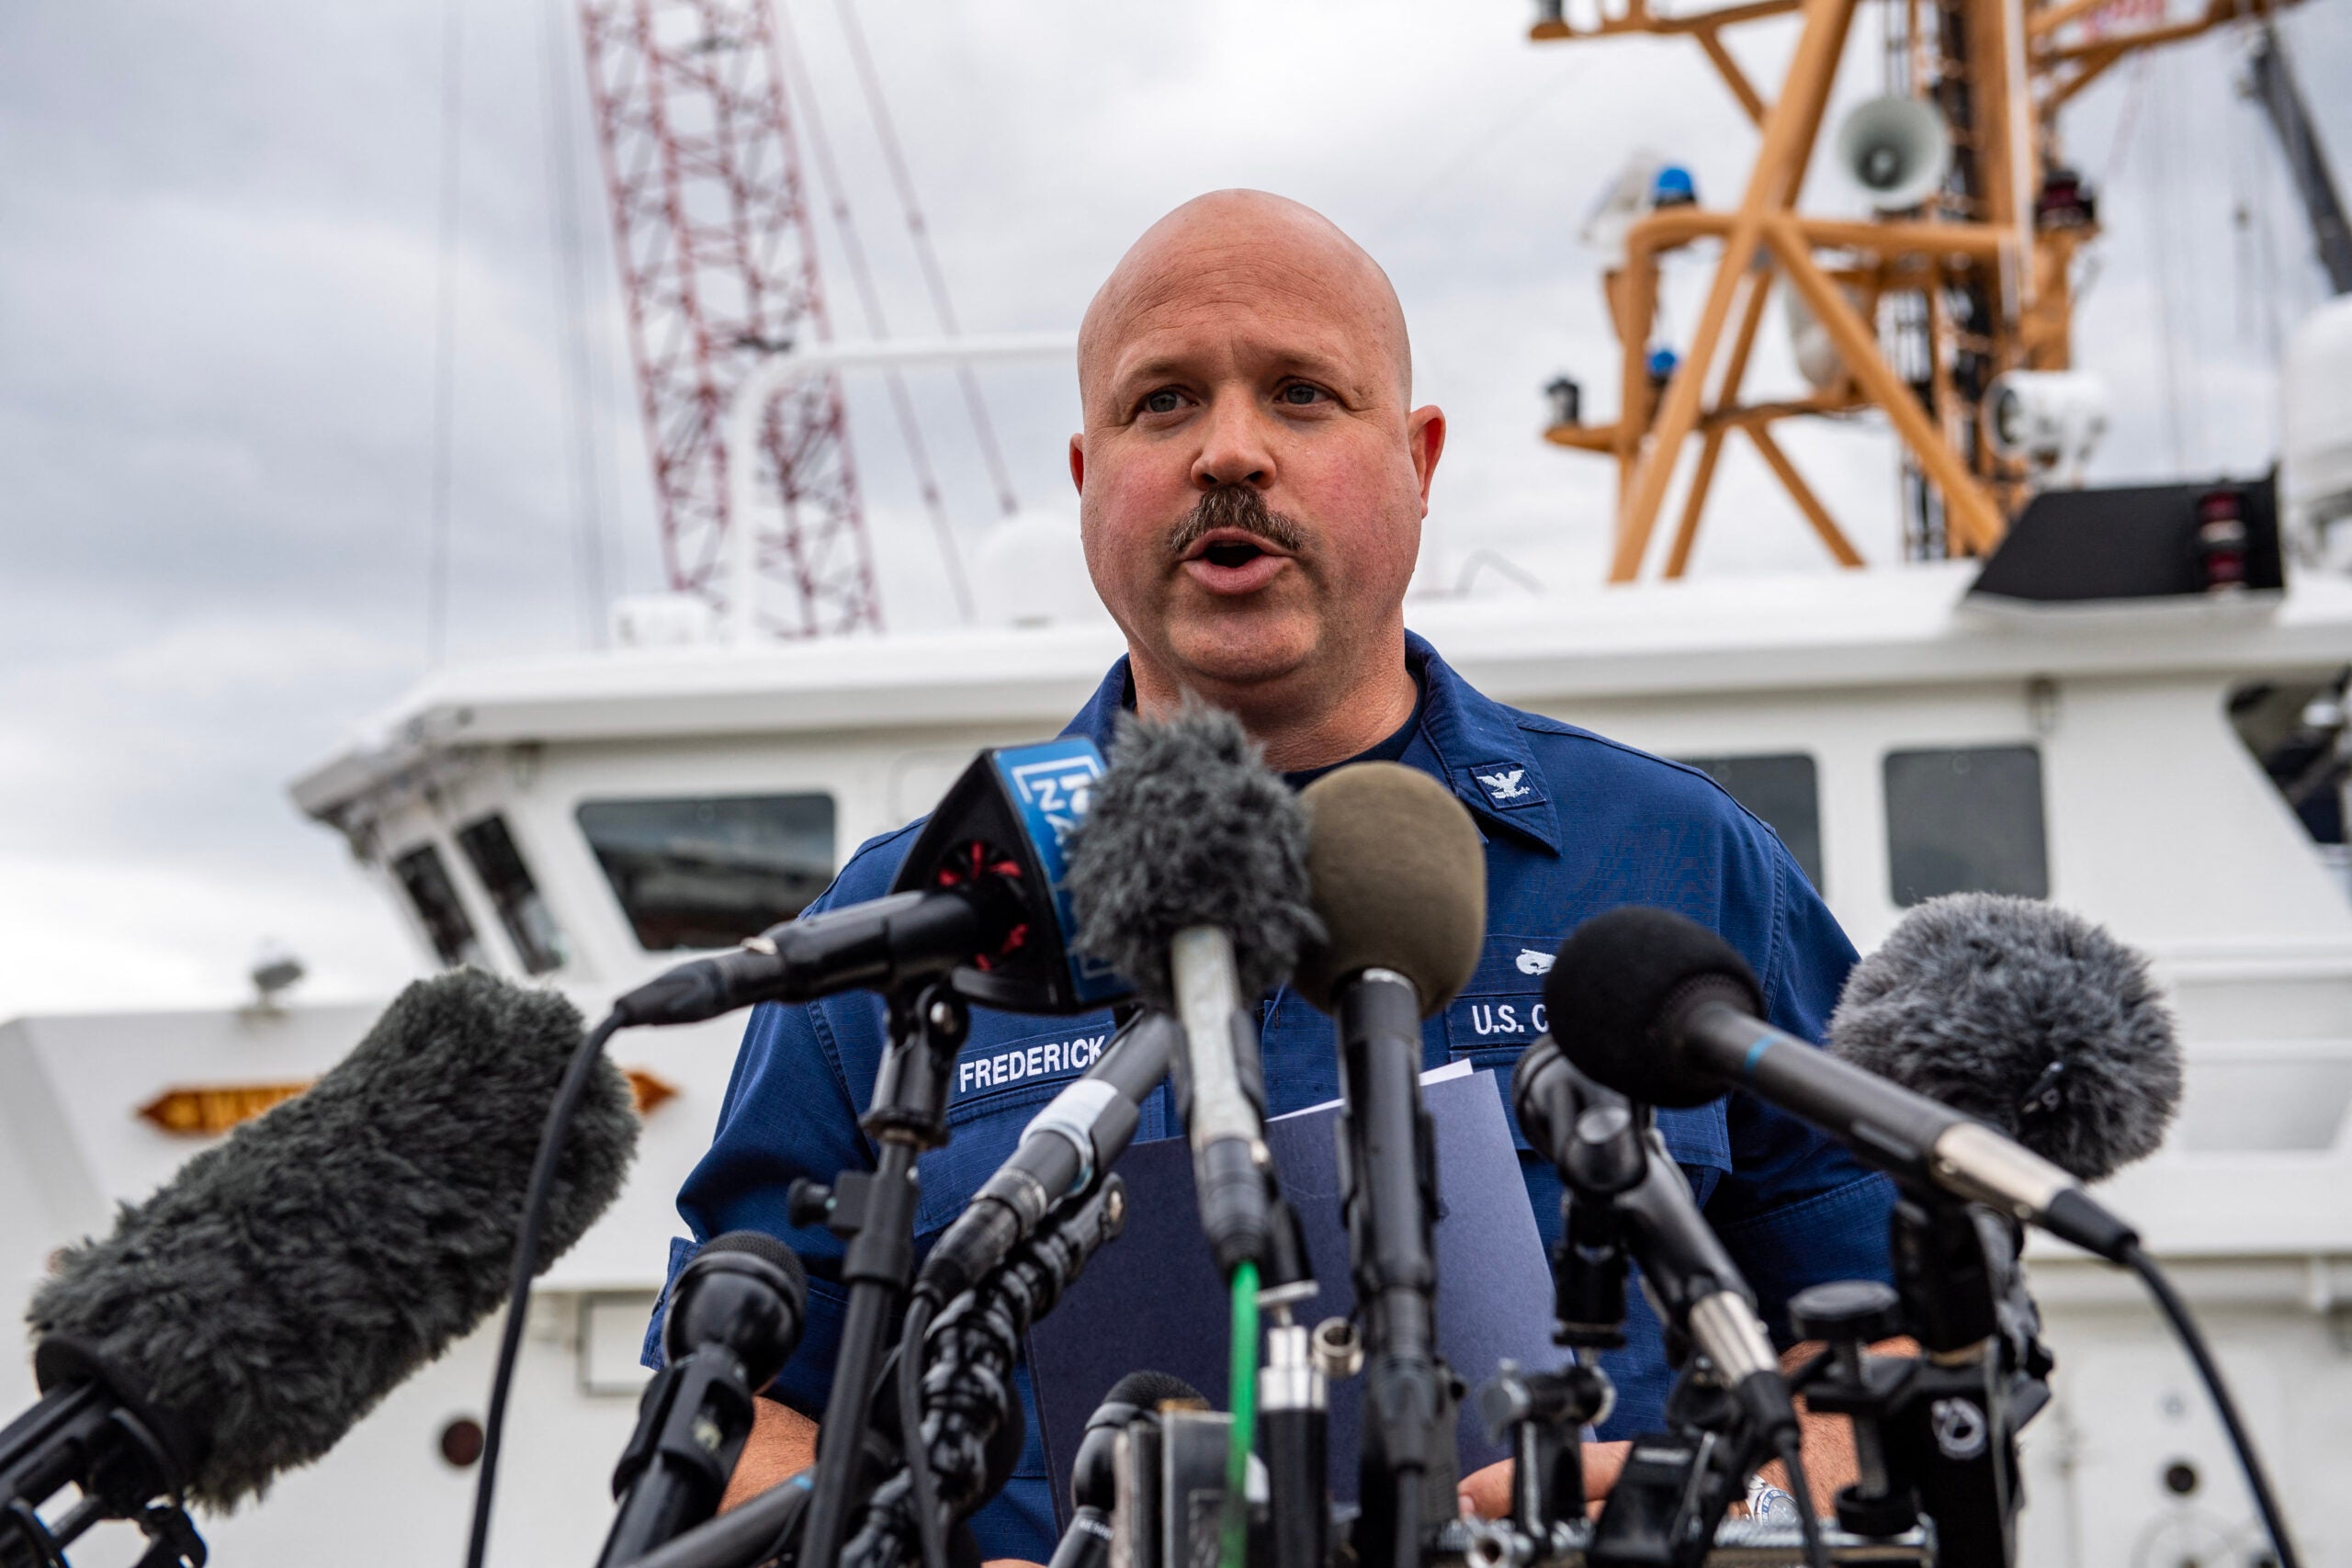 US Coast Guard Captain Jamie Frederick speaks during a press conference about the search efforts for the submersible that went missing near the wreck of the Titanic, at Coast Guard Base in Boston, Massachusetts, on June 20, 2023. The Titan submersible with five people on board has "about 40 hours of breathable air" left, Frederick said Tuesday. (Photo by Joseph Prezioso / AFP) (Photo by JOSEPH PREZIOSO/AFP via Getty Images)